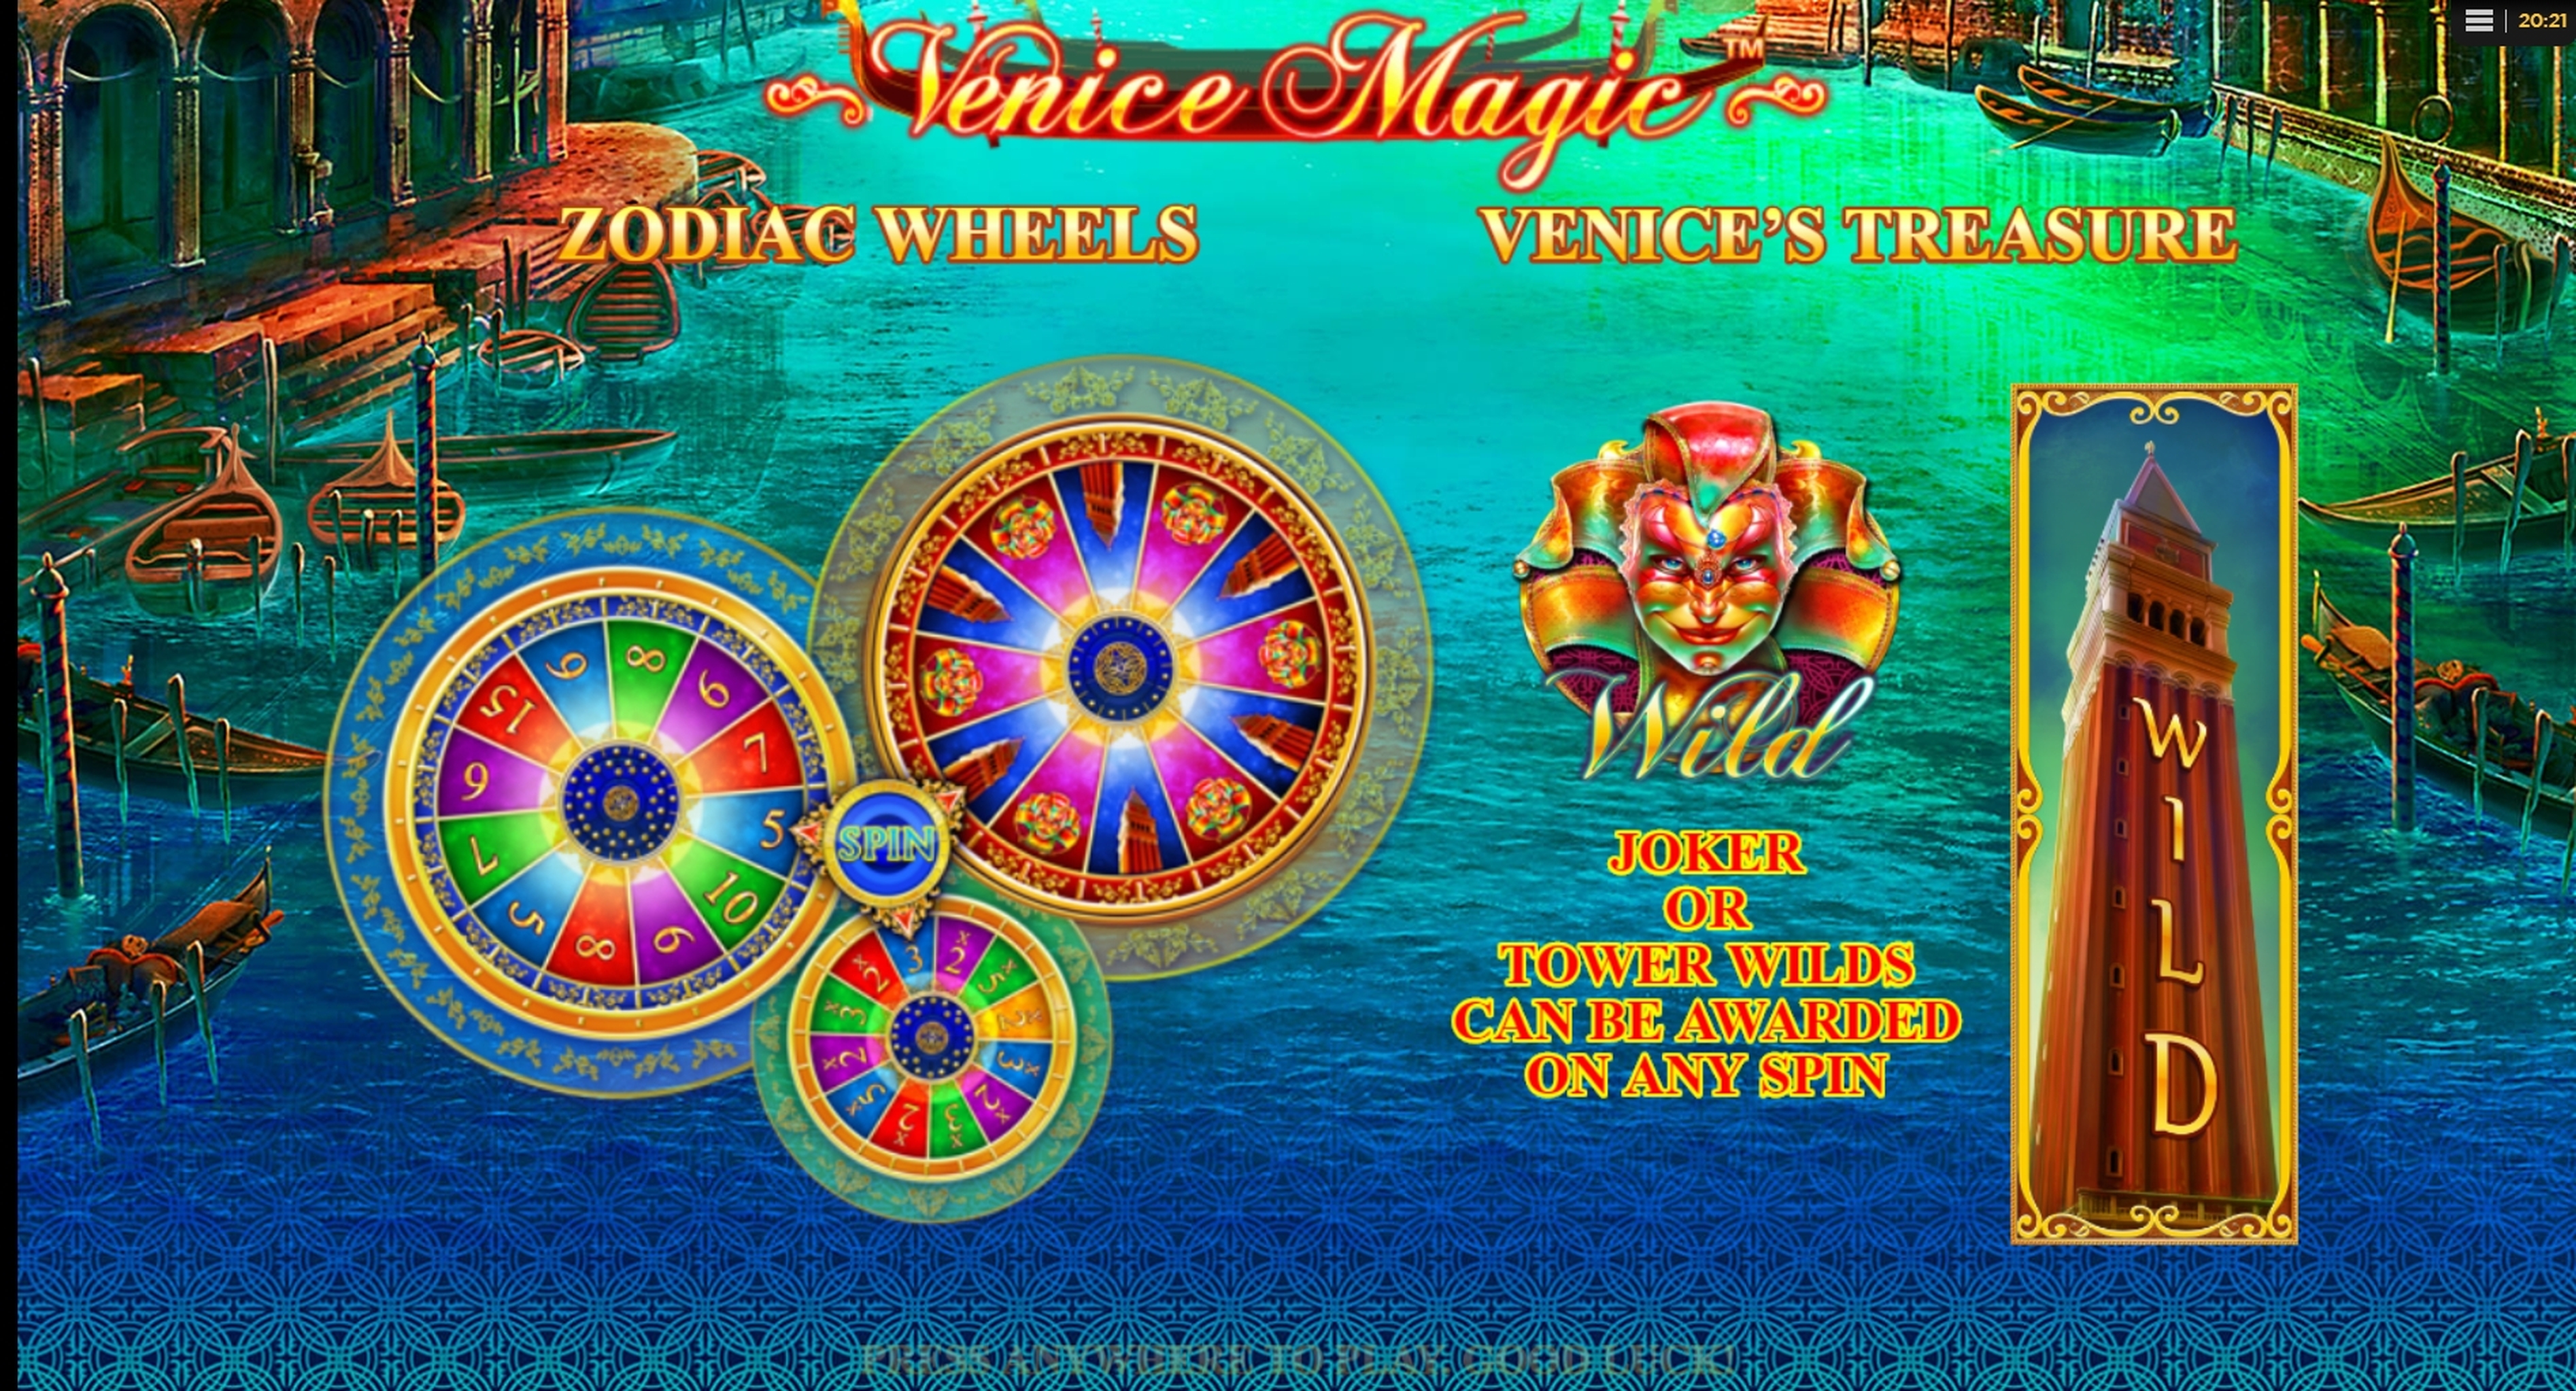 Play Venice Magic Free Casino Slot Game by Side City Studios